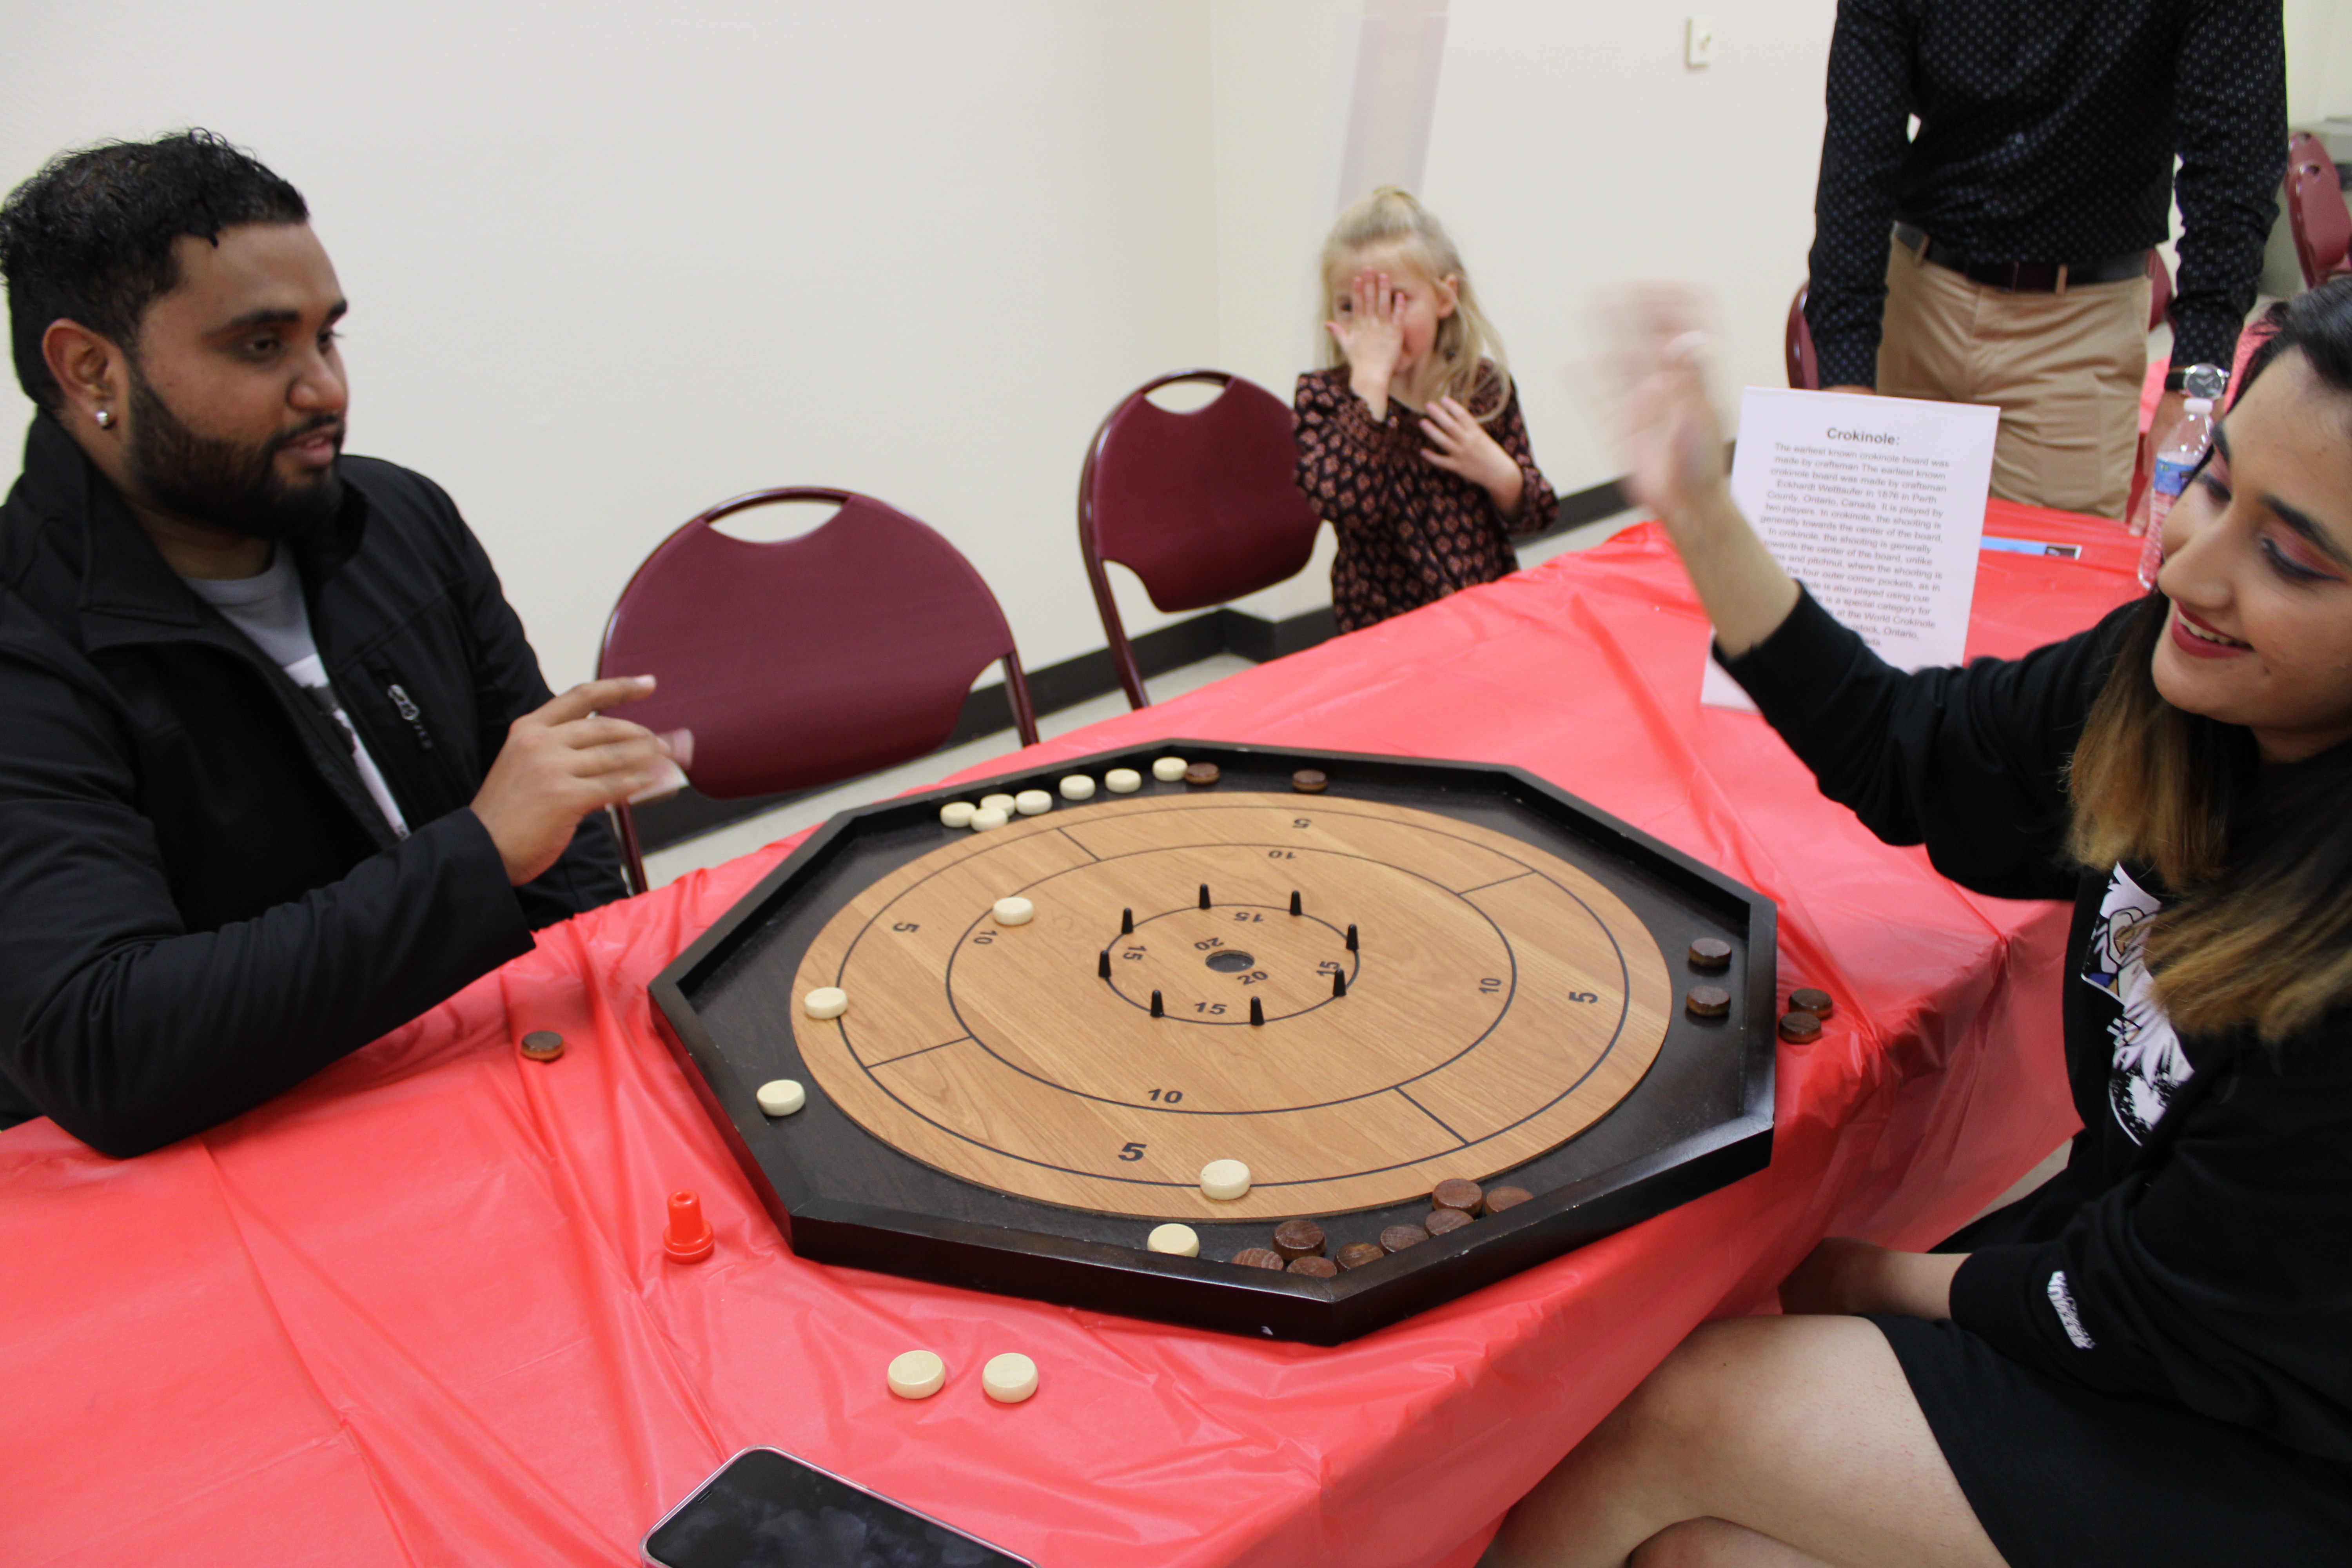 Two students, one male and one female playing Crokinole at International Game Night.